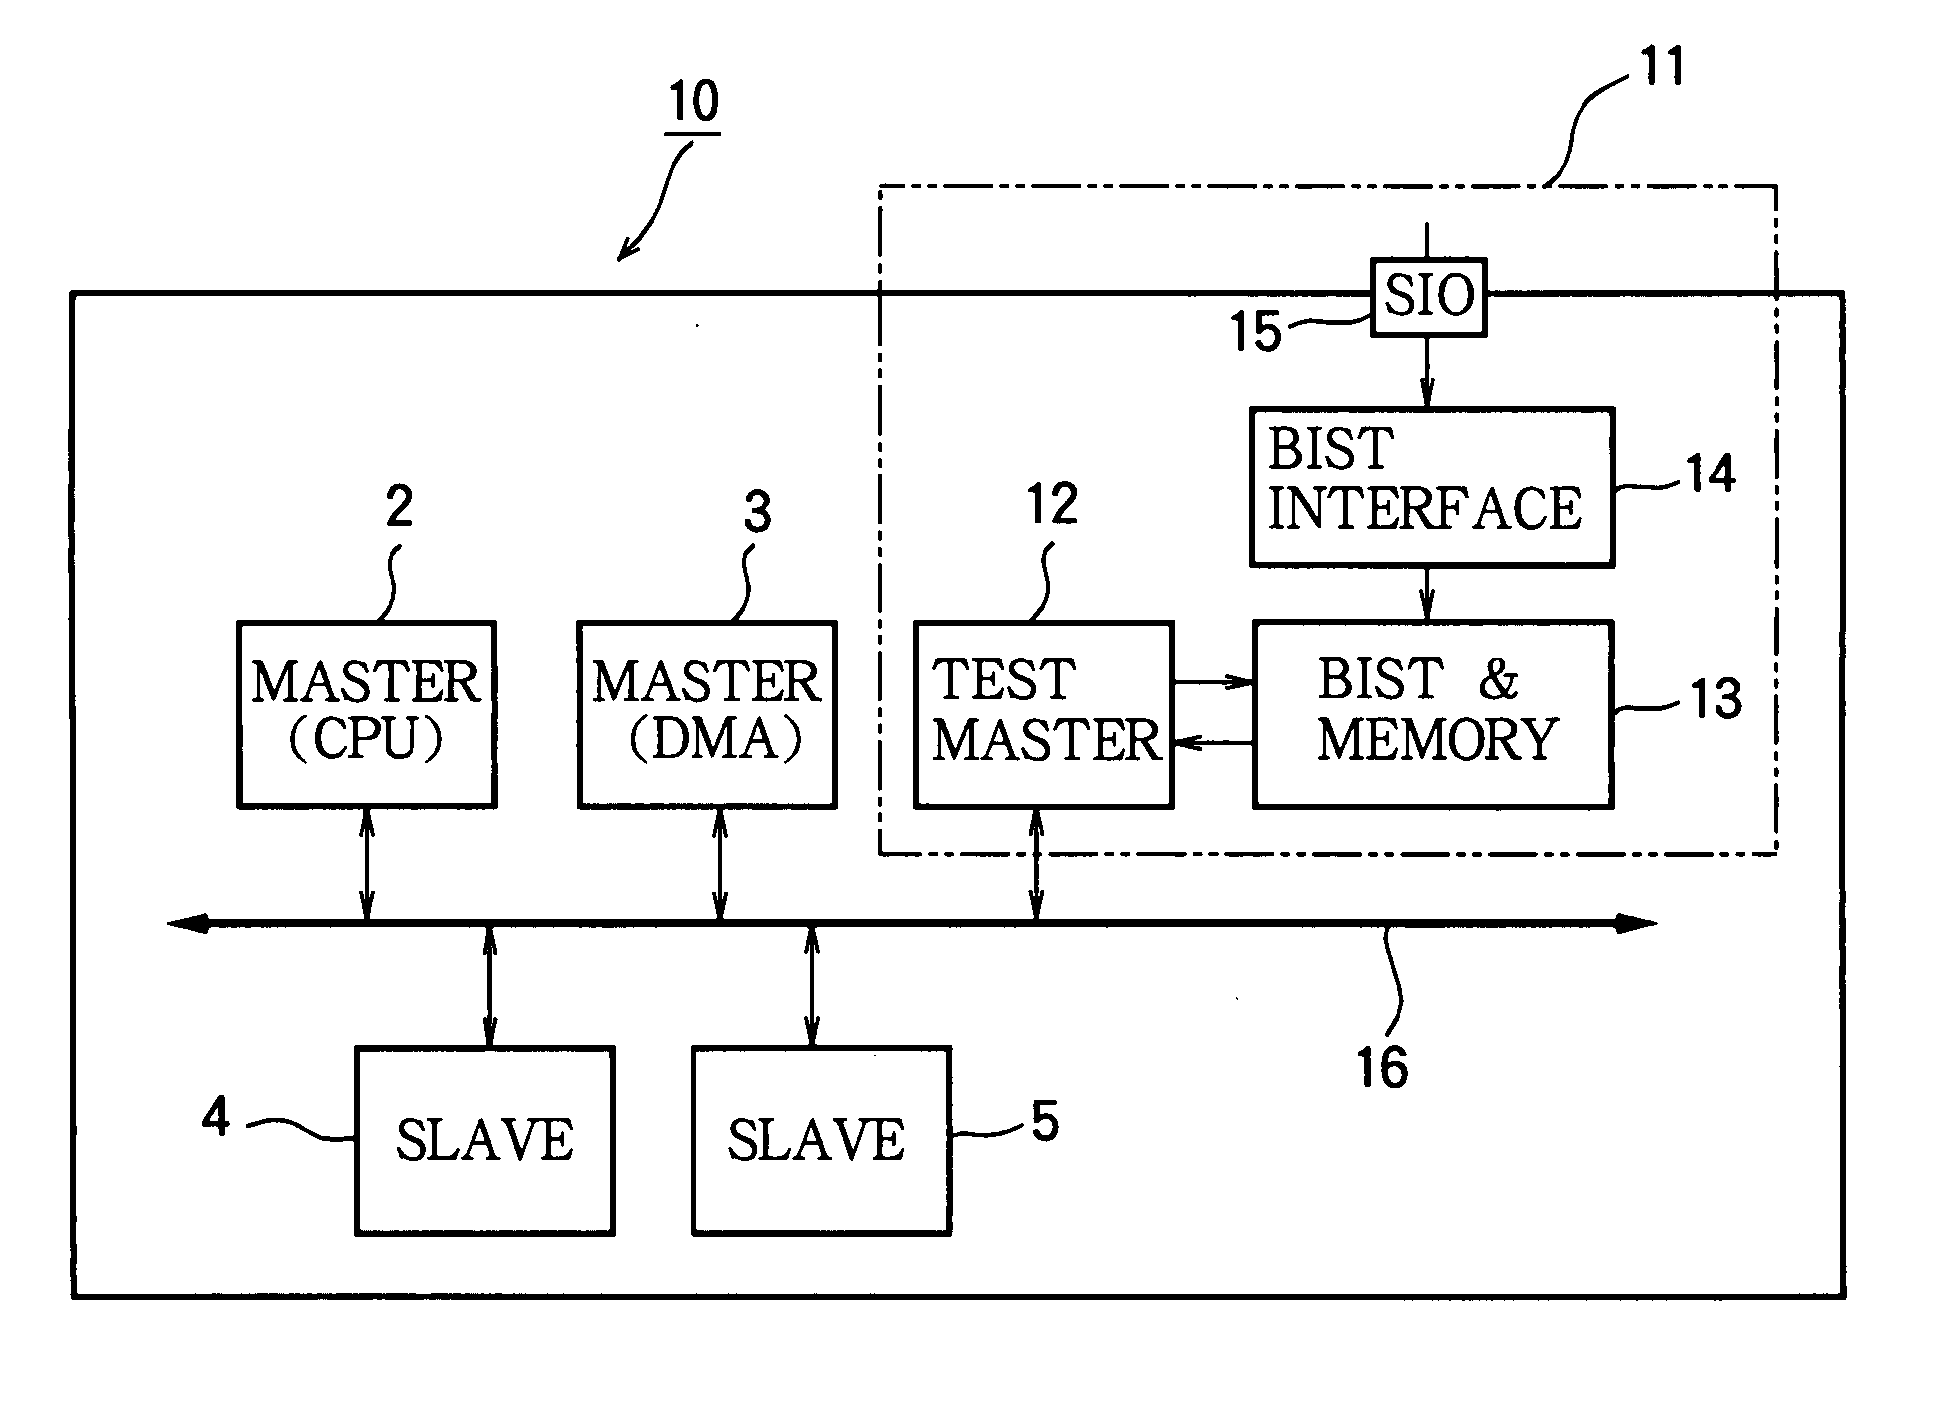 Verification circuitry for master-slave system